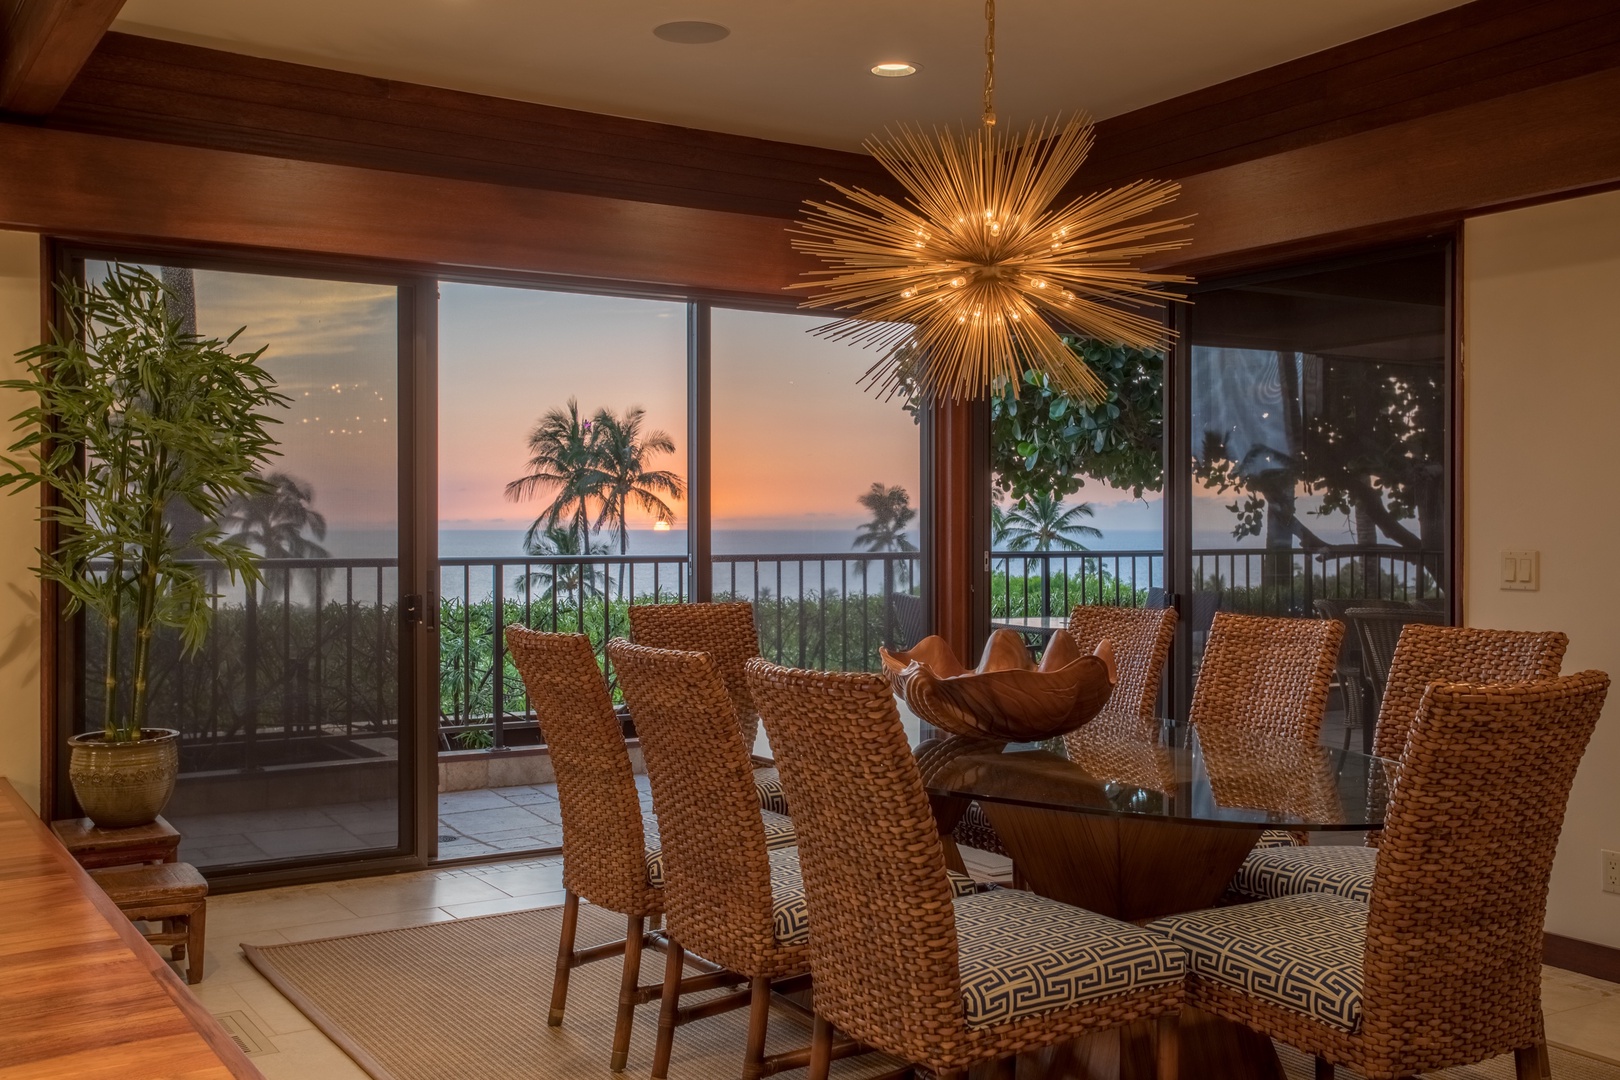 Kamuela Vacation Rentals, 3BD Villas (39) at Mauna Kea Resort - Sunset views over the Pacific from dining area and almost every room in the house.